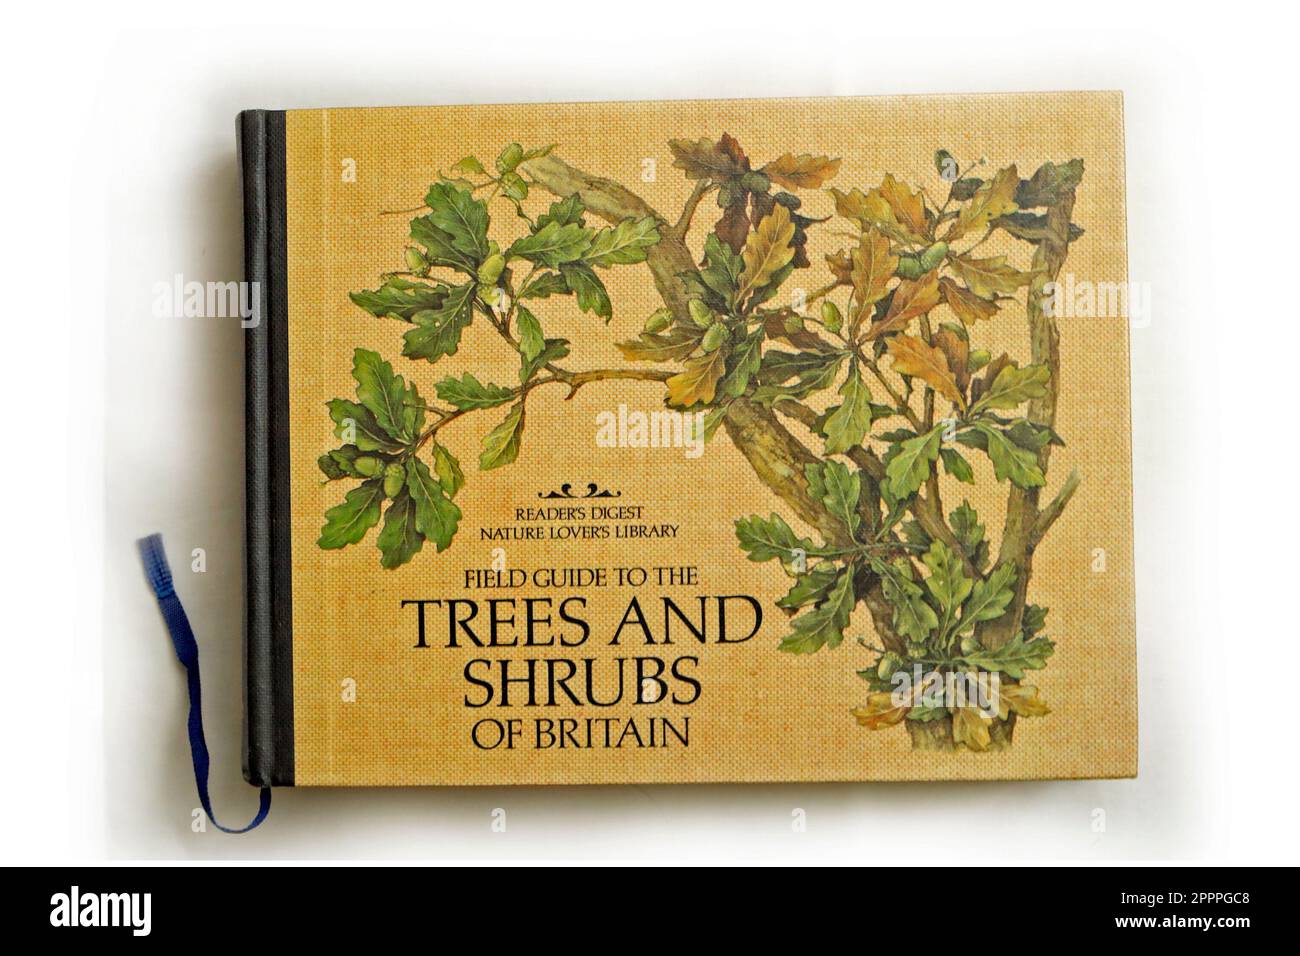 Hardback book on white background - Reader's Digest Nature Lovers library - Field Guide to the Trees and Shrubs of Britain Stock Photo